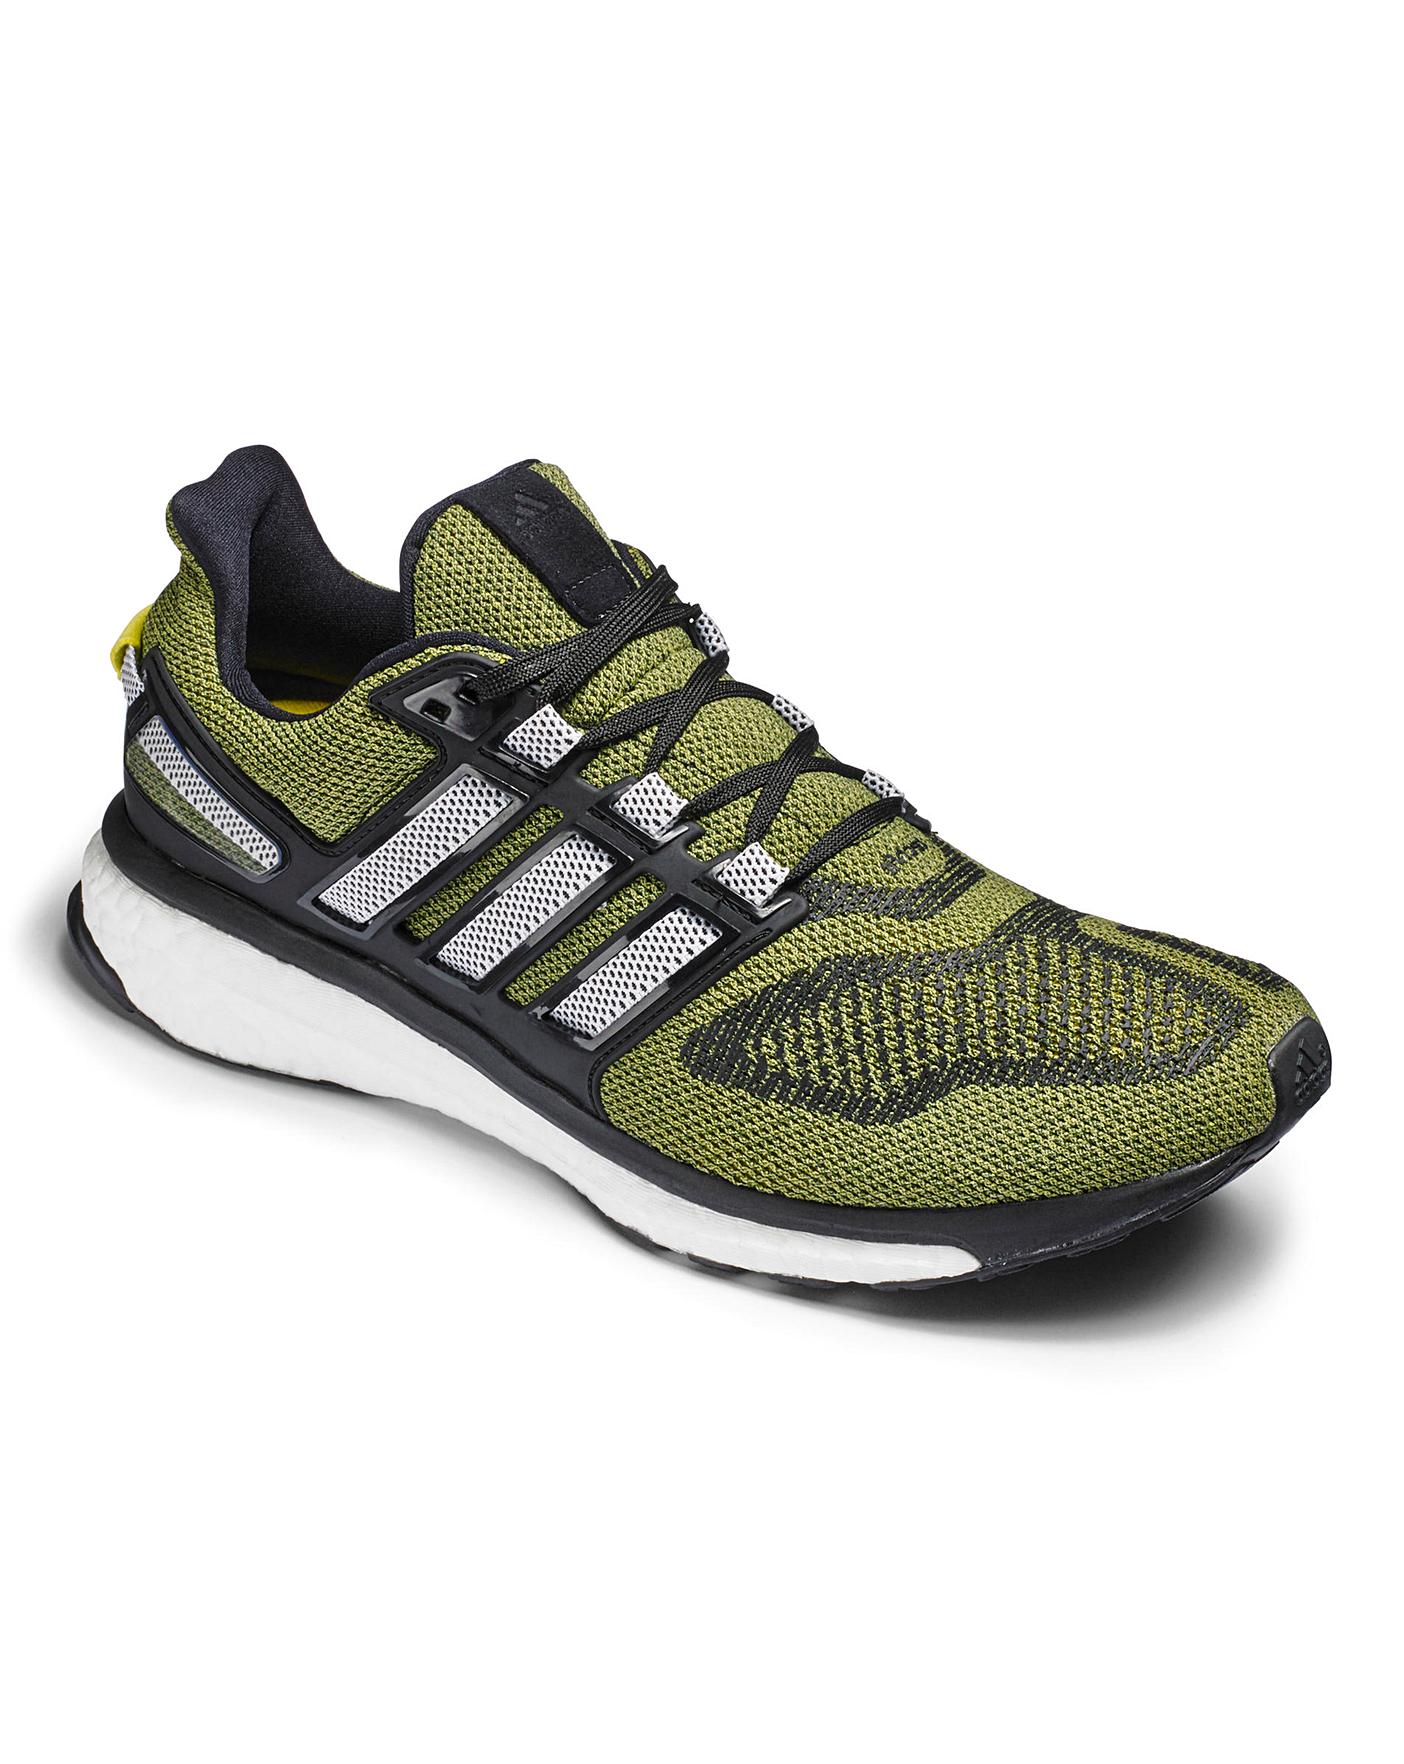 adidas boost mens trainers